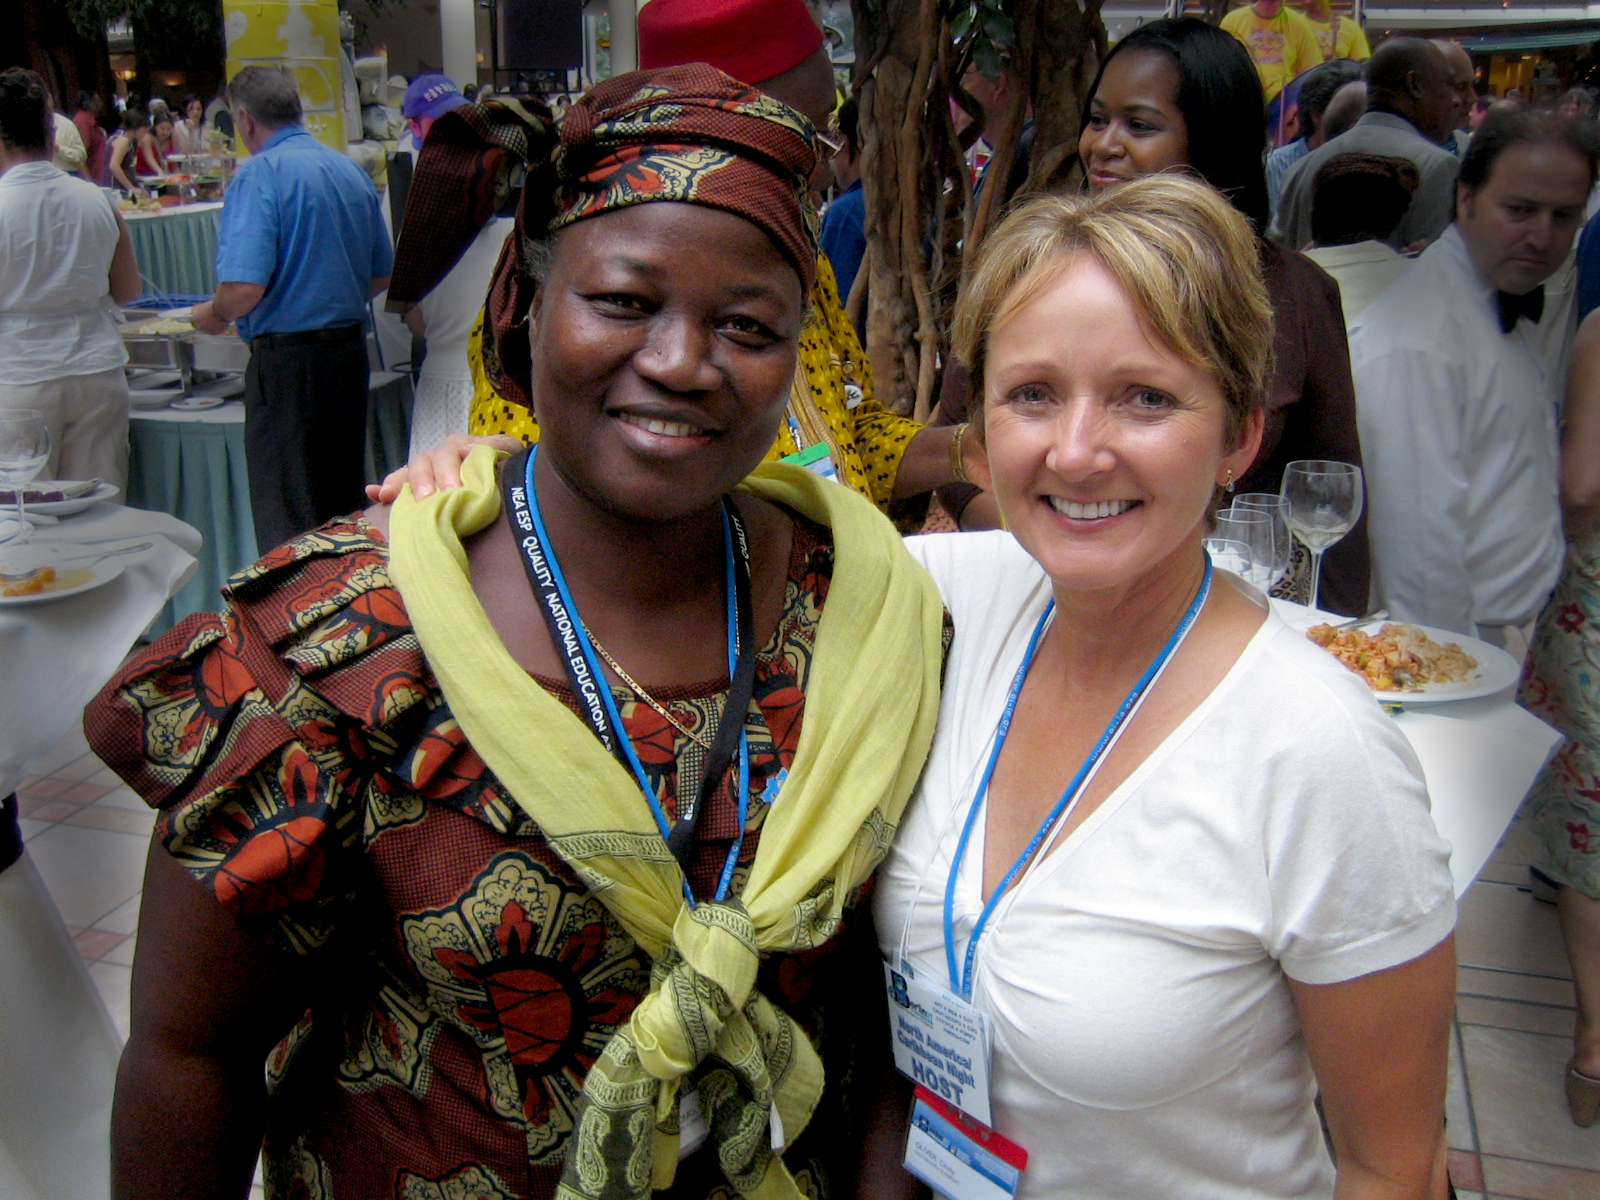 Cindy Oliver (right) who chairs CAUT’s contract academic staff committee, was the impetus behind CAUT’s resolution. She’s seen here at the EI World Congress with Margaret Flomo, national president of the National Teachers Association of Liberia. 